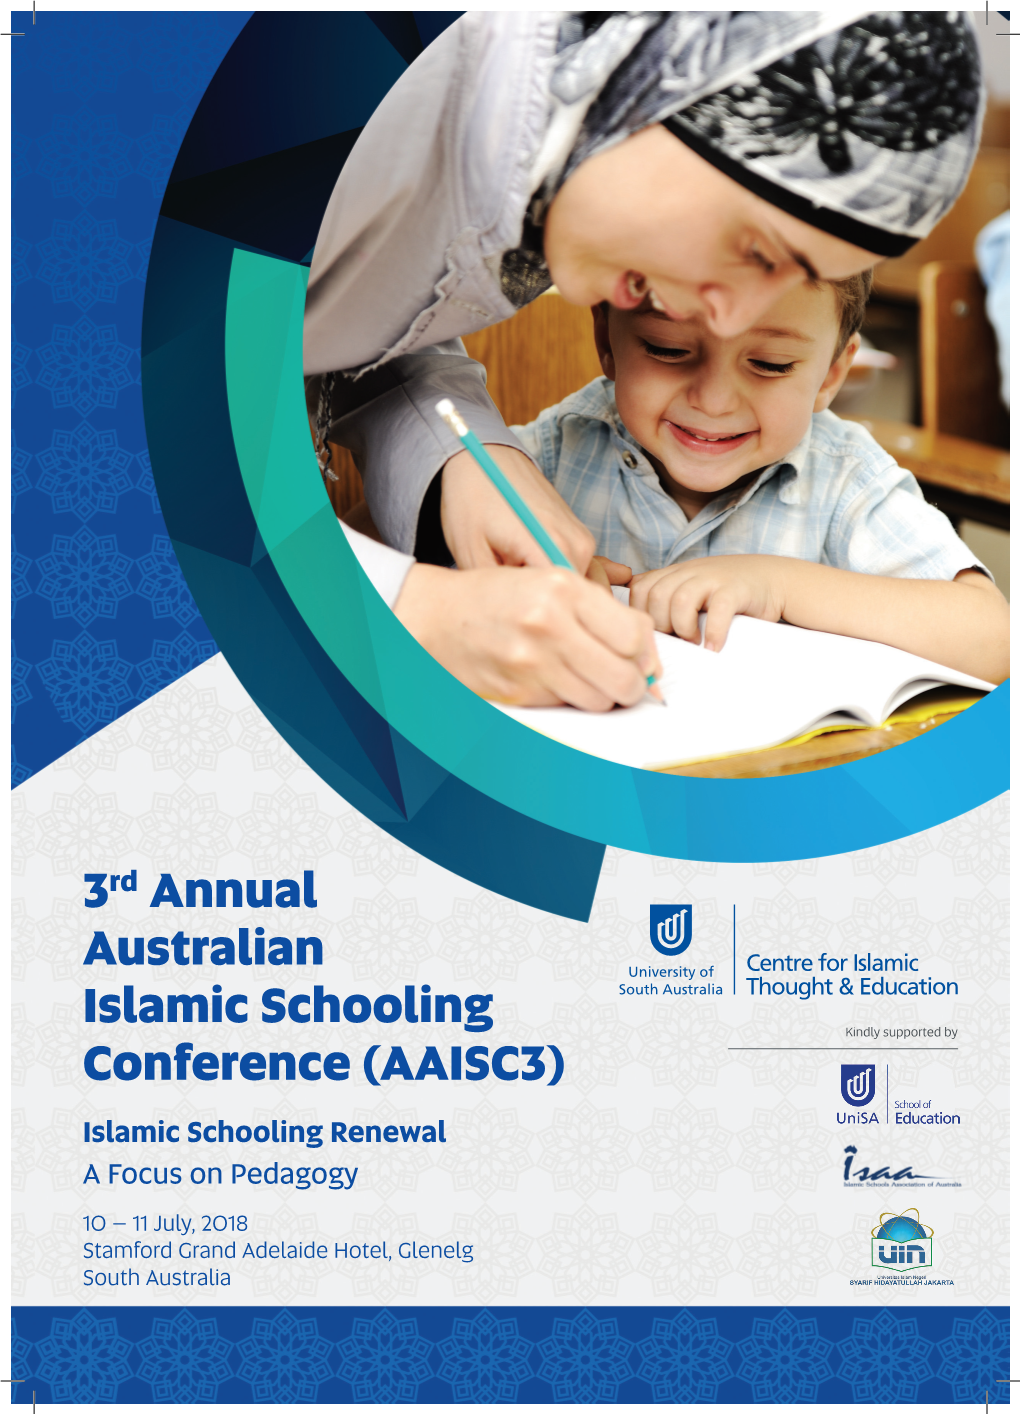 3Rd Annual Australian Islamic Schooling Conference (AAISC3) We Meet on the Lands of the Kaurna People